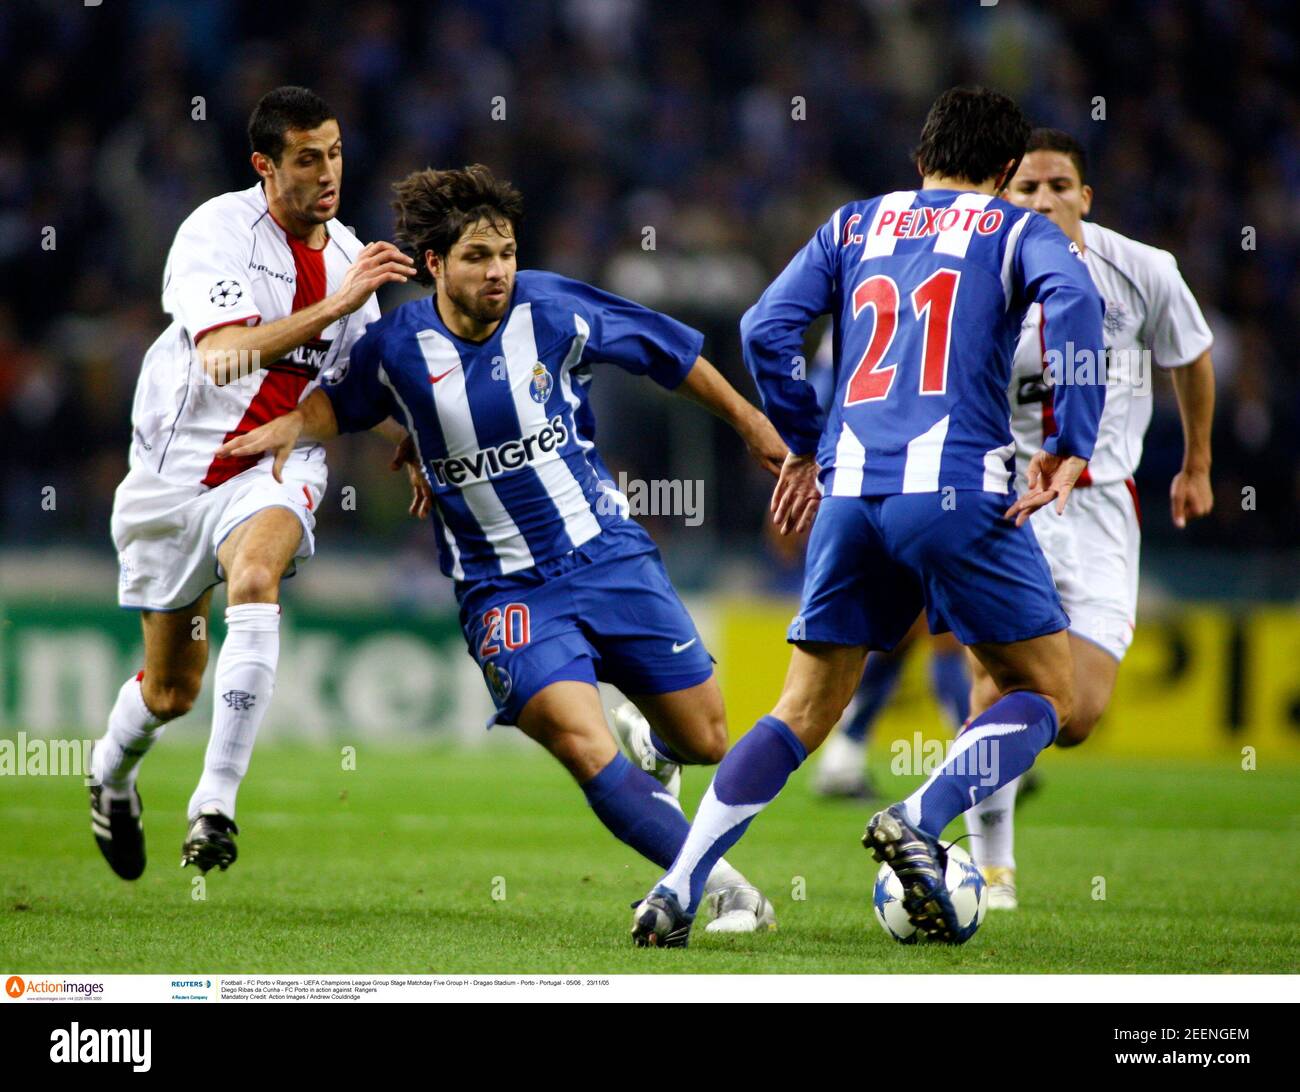 Football - FC Porto v Rangers - UEFA Champions League Group Stage Matchday Five Group H - Dragao Stadium - Porto - Portugal - 05/06 ,  23/11/05  Diego Ribas da Cunha - FC Porto in action against  Rangers   Mandatory Credit: Action Images / Andrew Couldridge Stock Photo